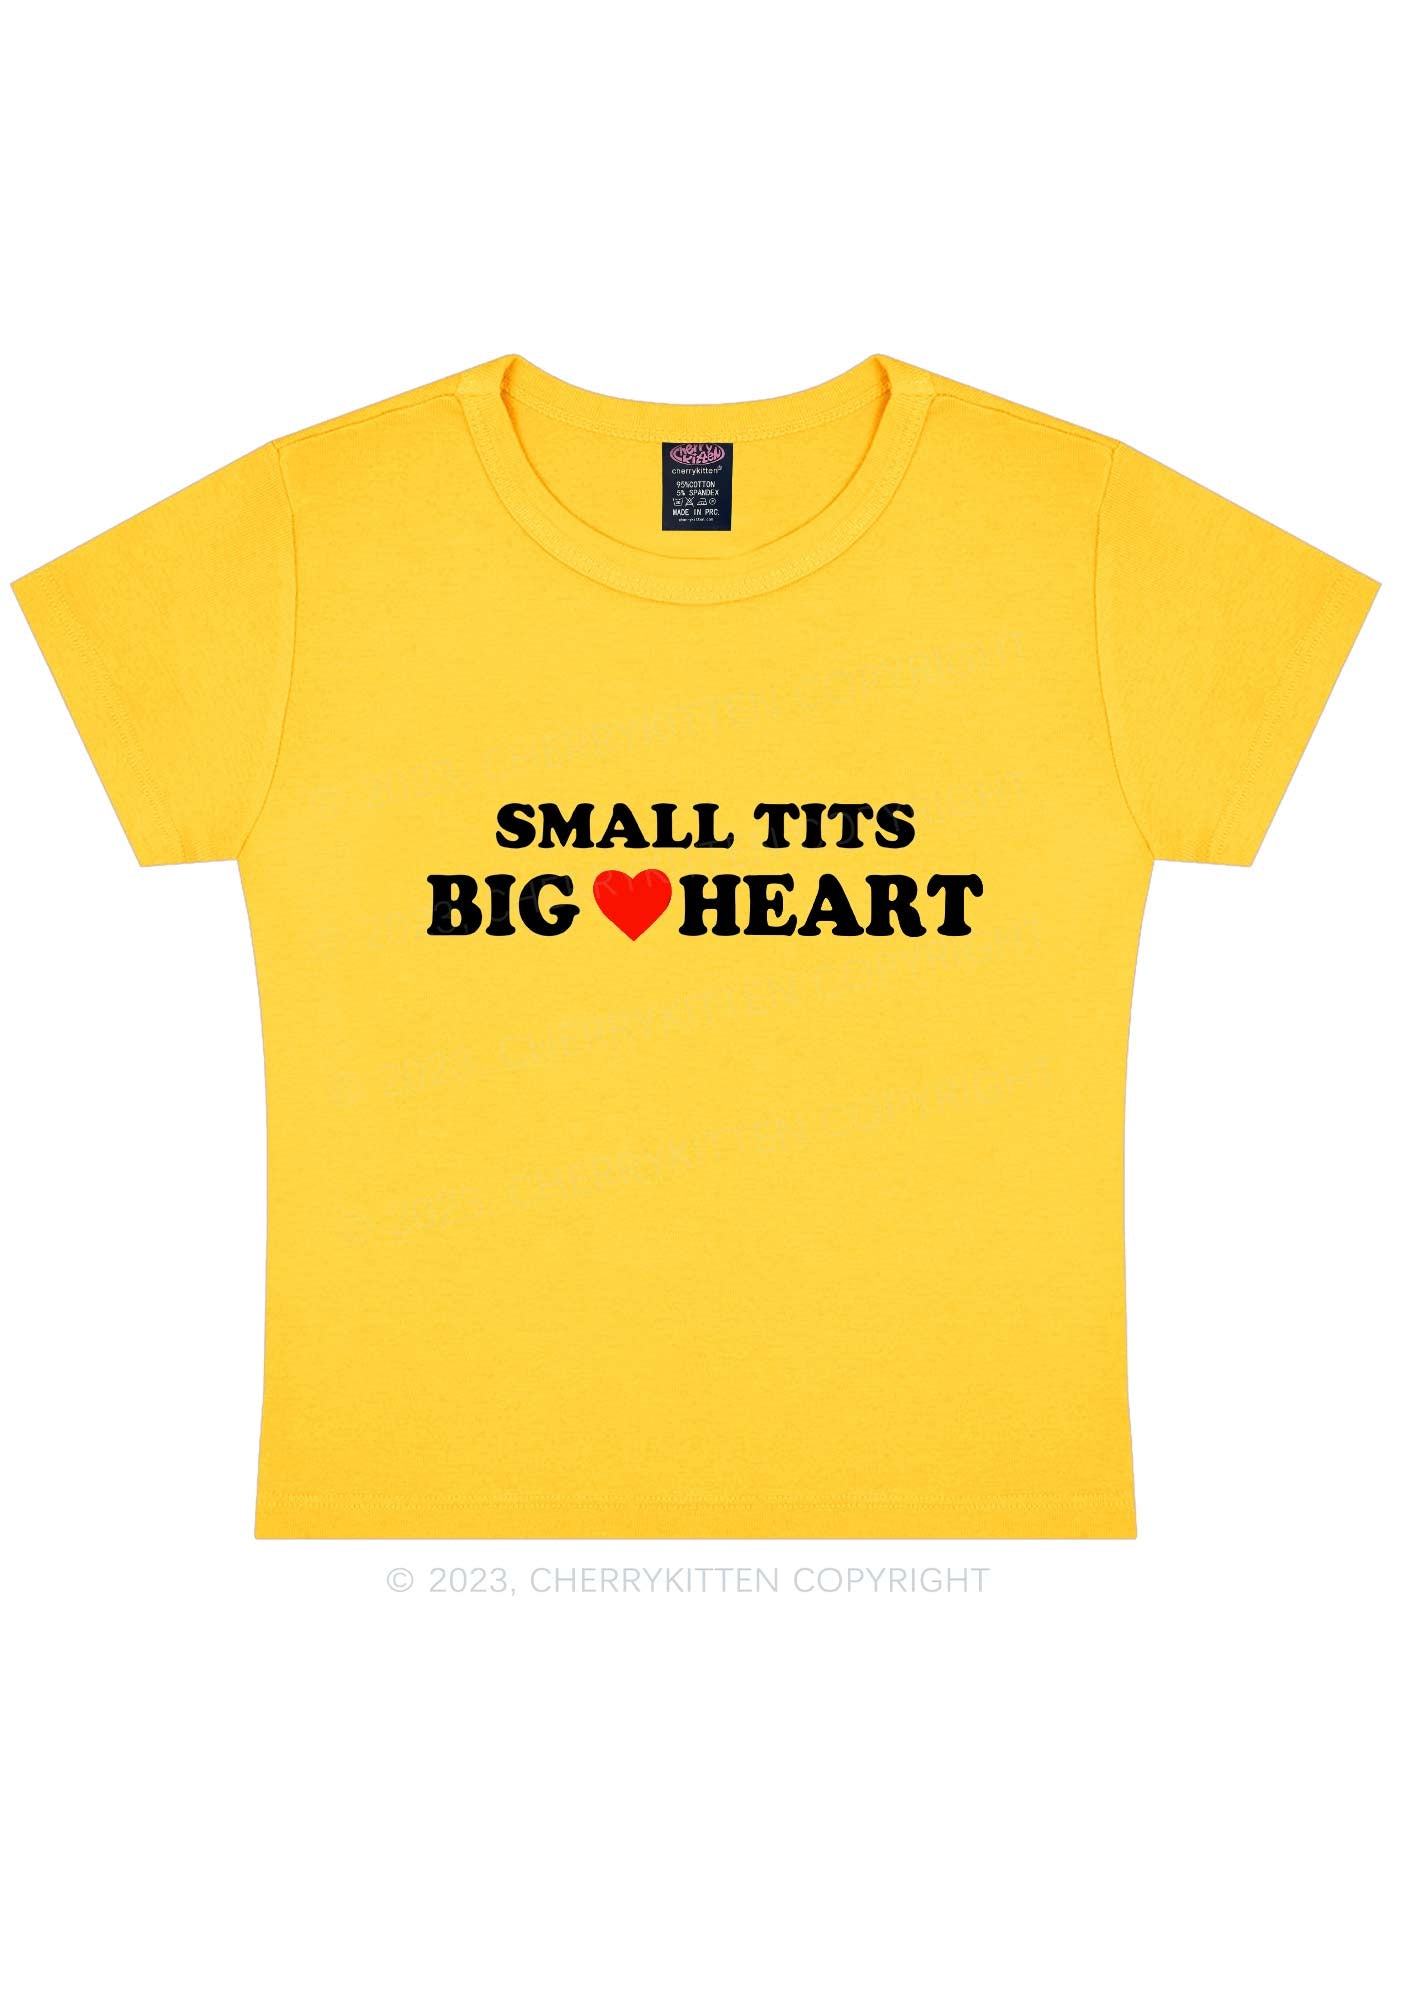 Flat Chest Big Heart Slogan Baby Tee Y2k Cropped Graphic T Shirt 2000s Era  Mall Goth Style Top -  Canada